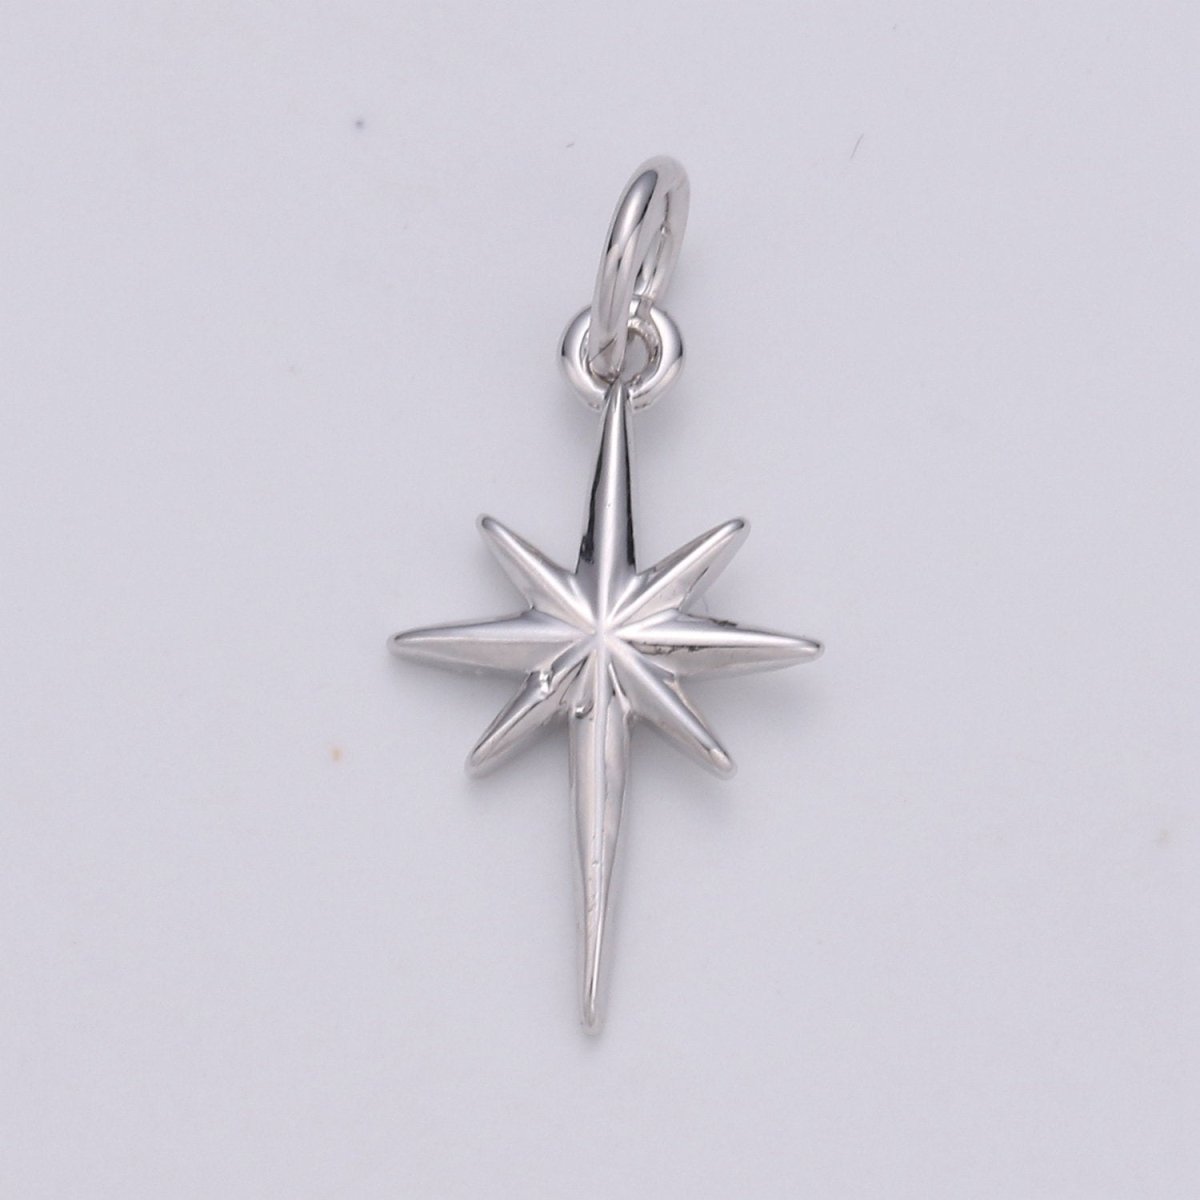 Dainty Gold North Star Charm Necklace, Bethlehem Star Pendant in Silver Celestial Jewelry Making Supply D-450 D-451 - DLUXCA